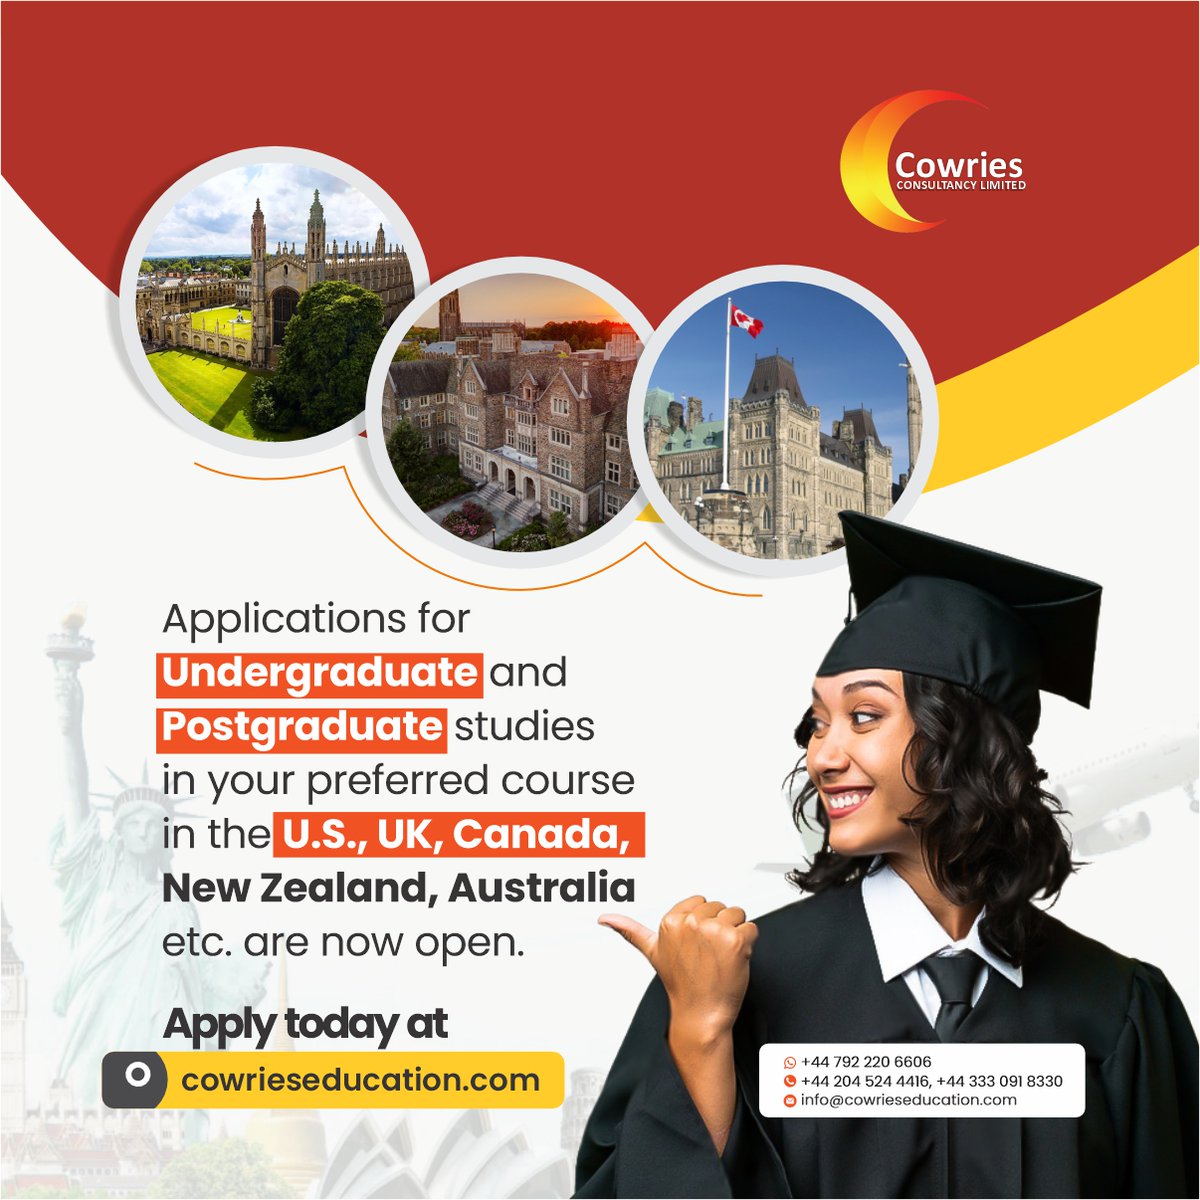 Visit cowrieseducation.com to get started on your path to international academic success. #GlobalEducation #UndergradAndPostgrad #StudyInUSUKCanada #OpenApplications #YourCourseYourFuture #AcademicExcellence #InternationalStudies #EducationWithoutBorders #ApplyNow